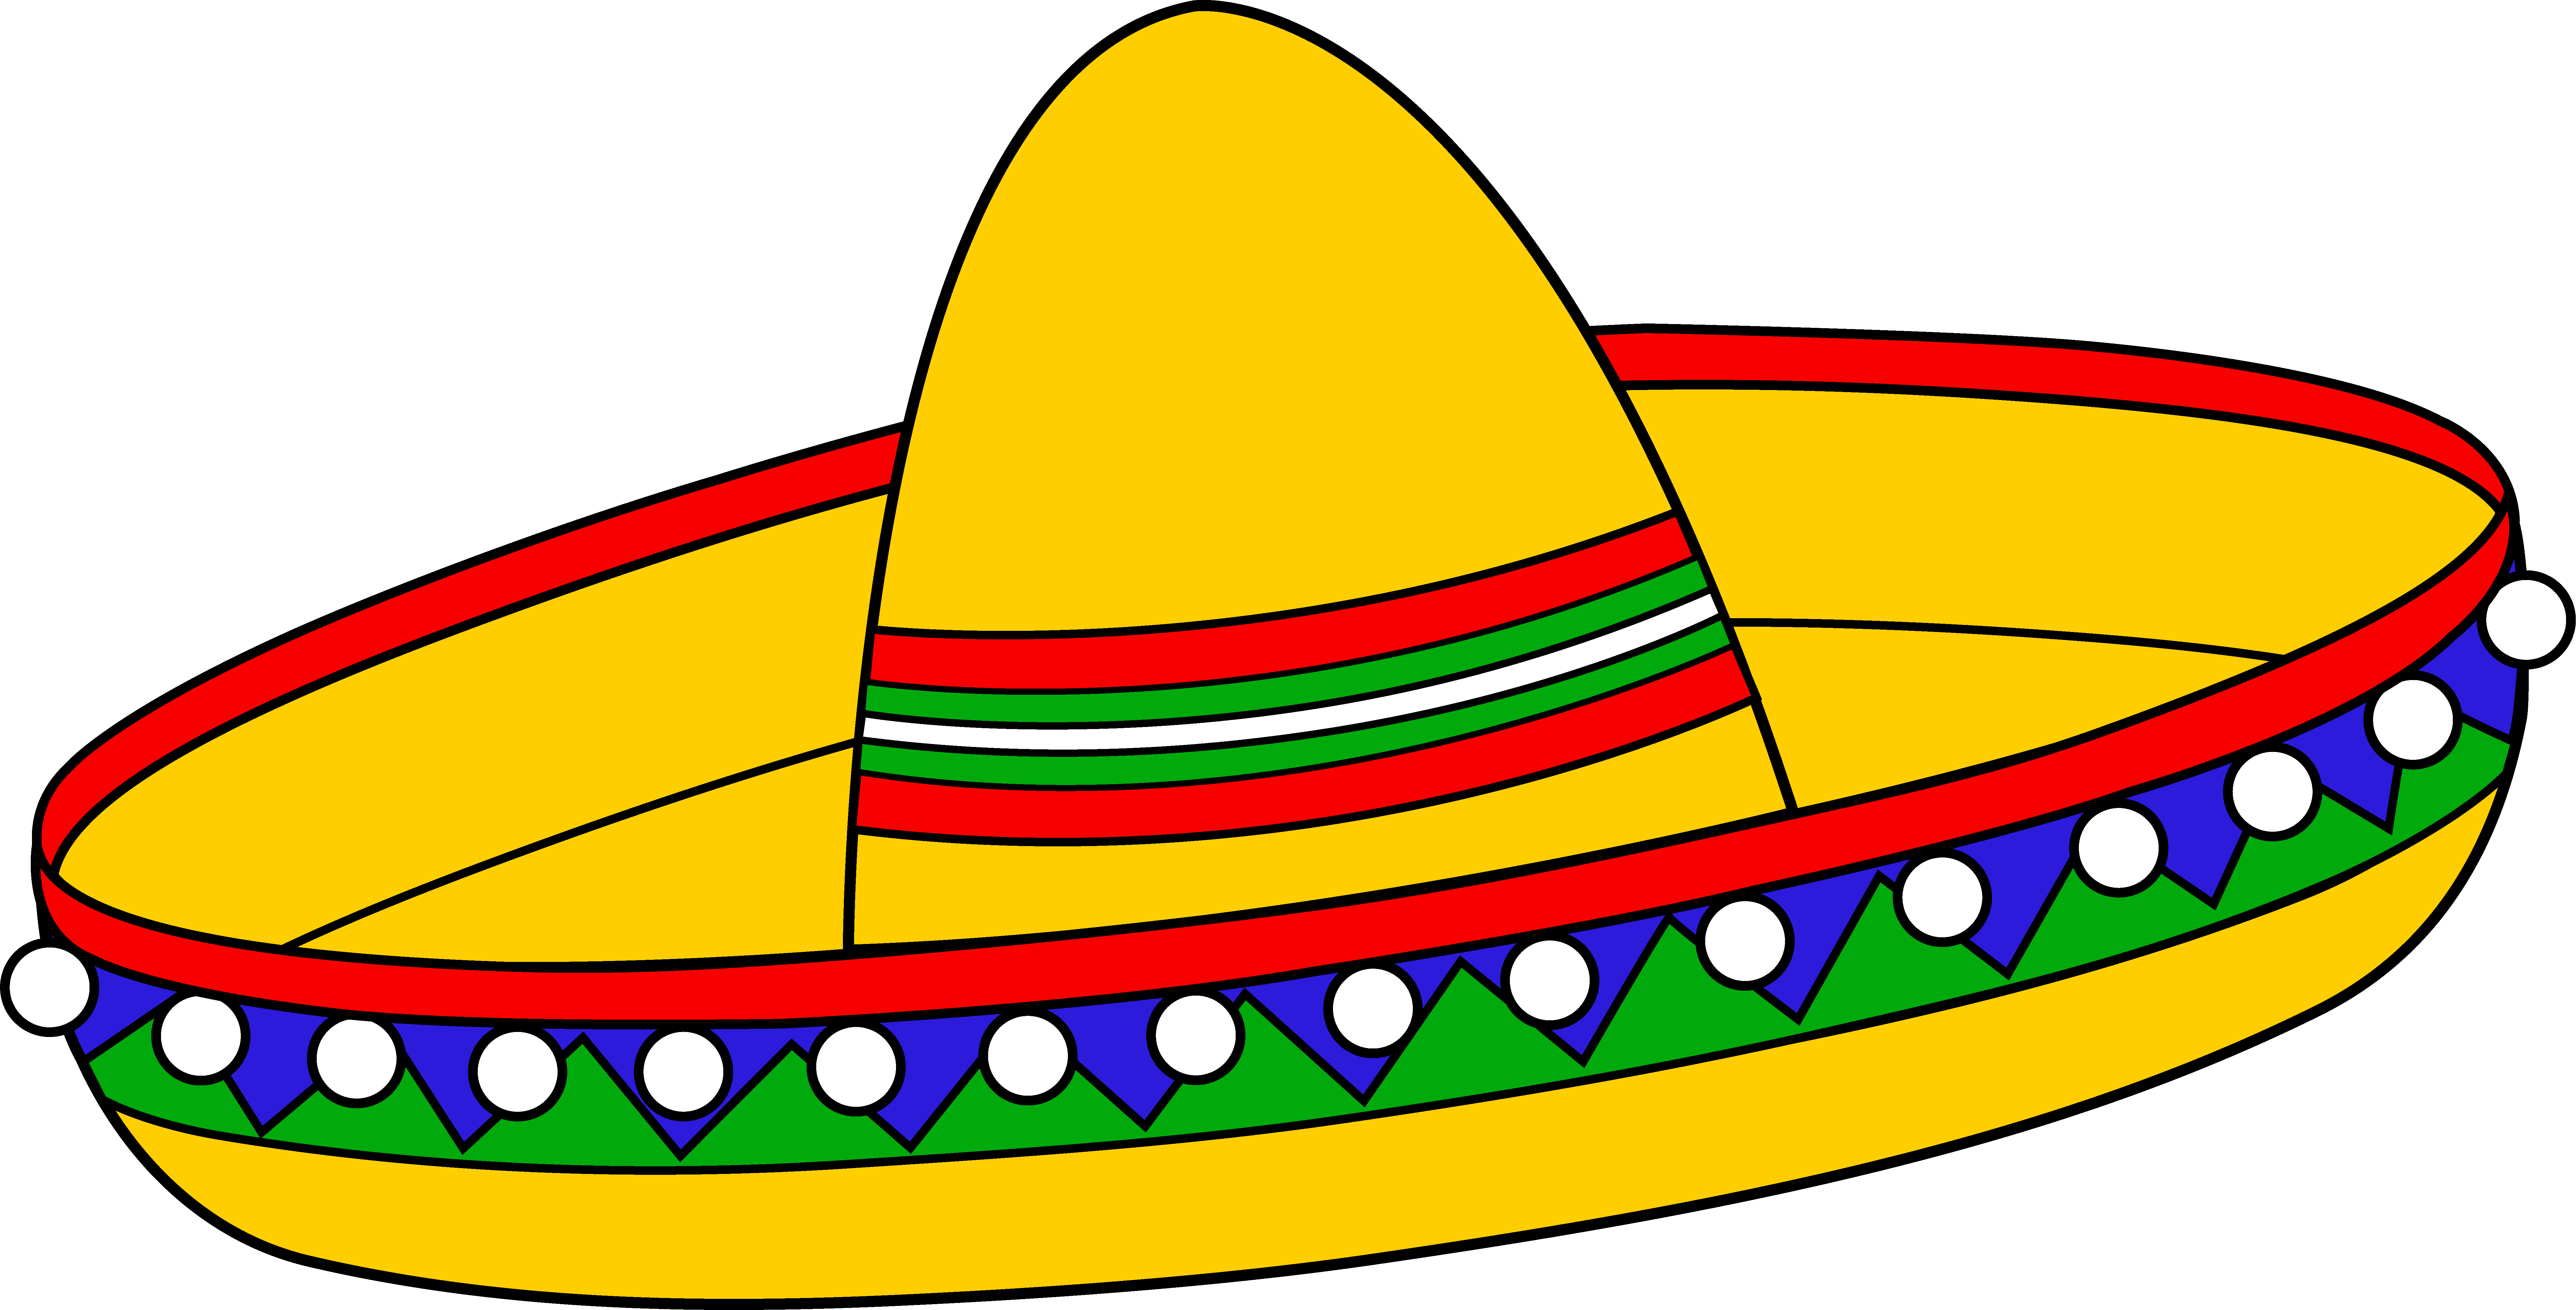 Clipart restaurant banner. Colorful mexican sombrero hat